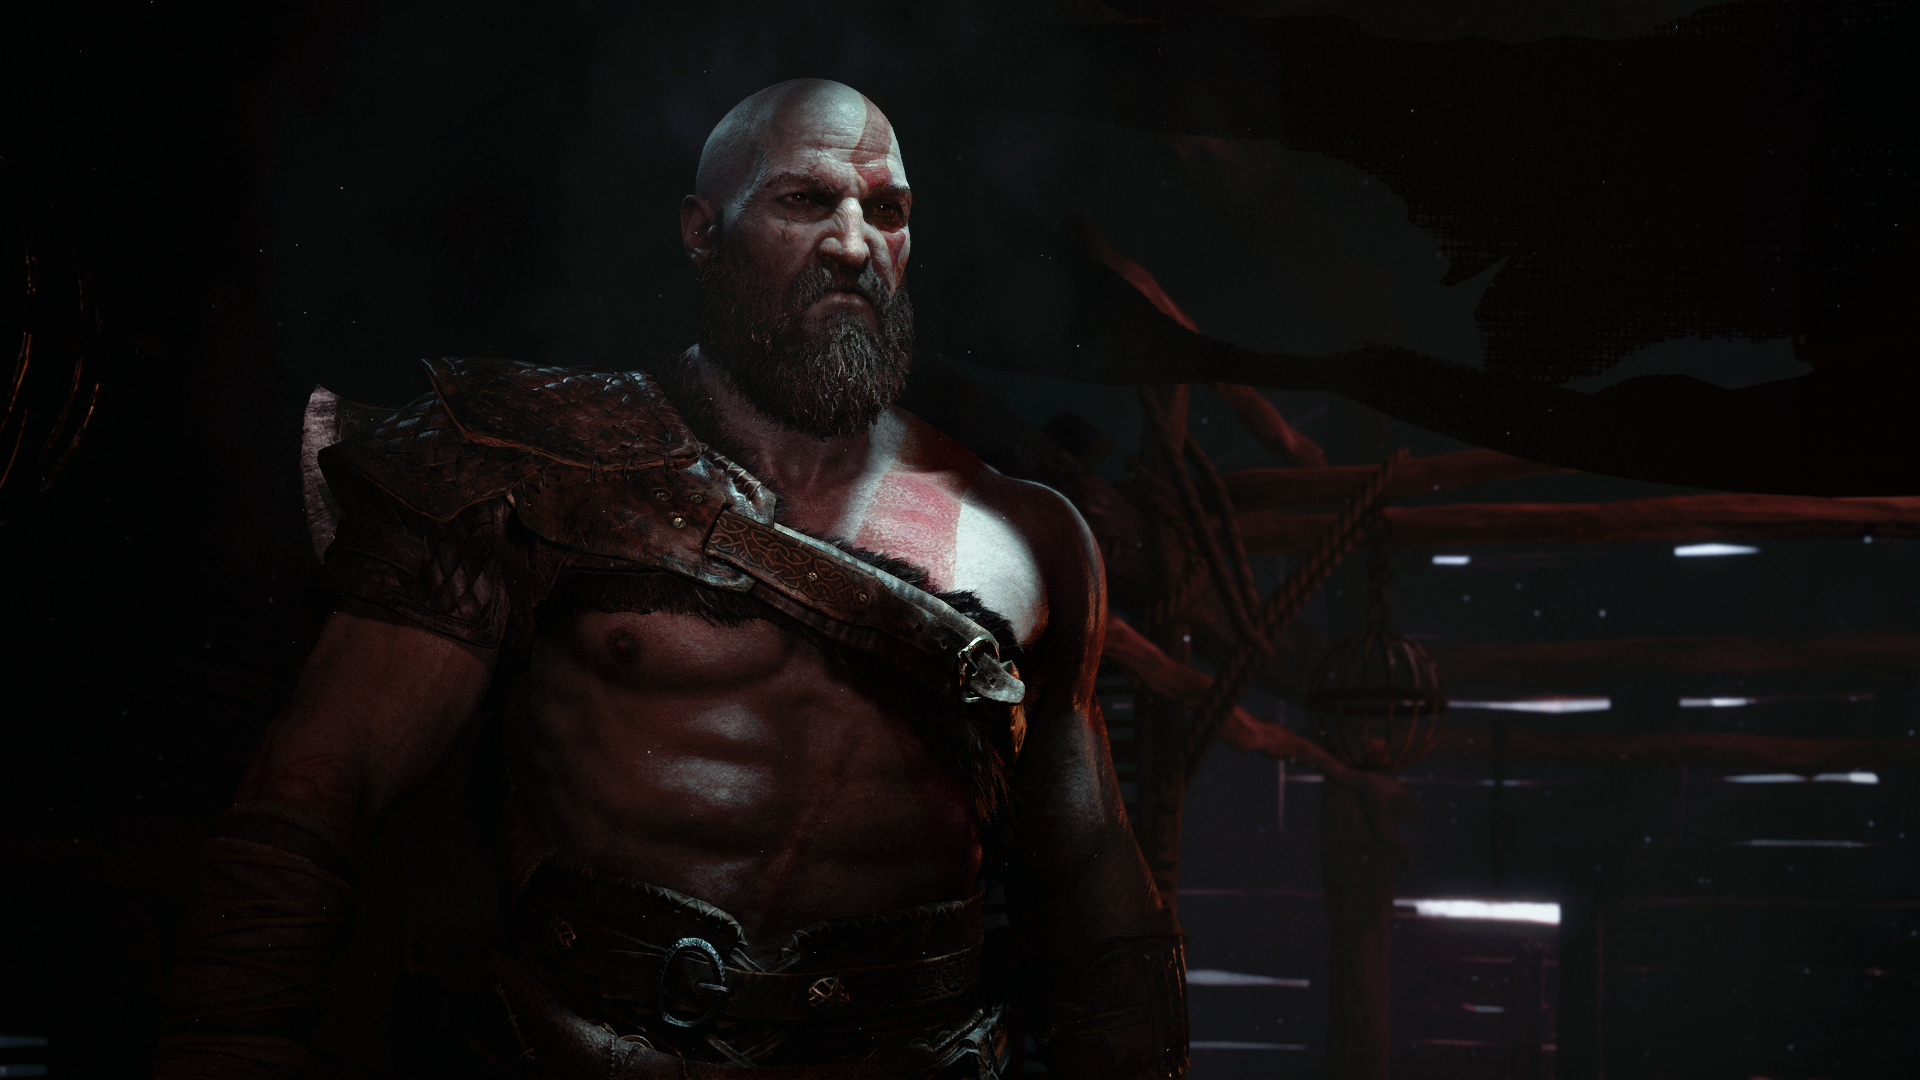 Free God of War update brings Enhanced Performance Experience to the PS5 version of the game